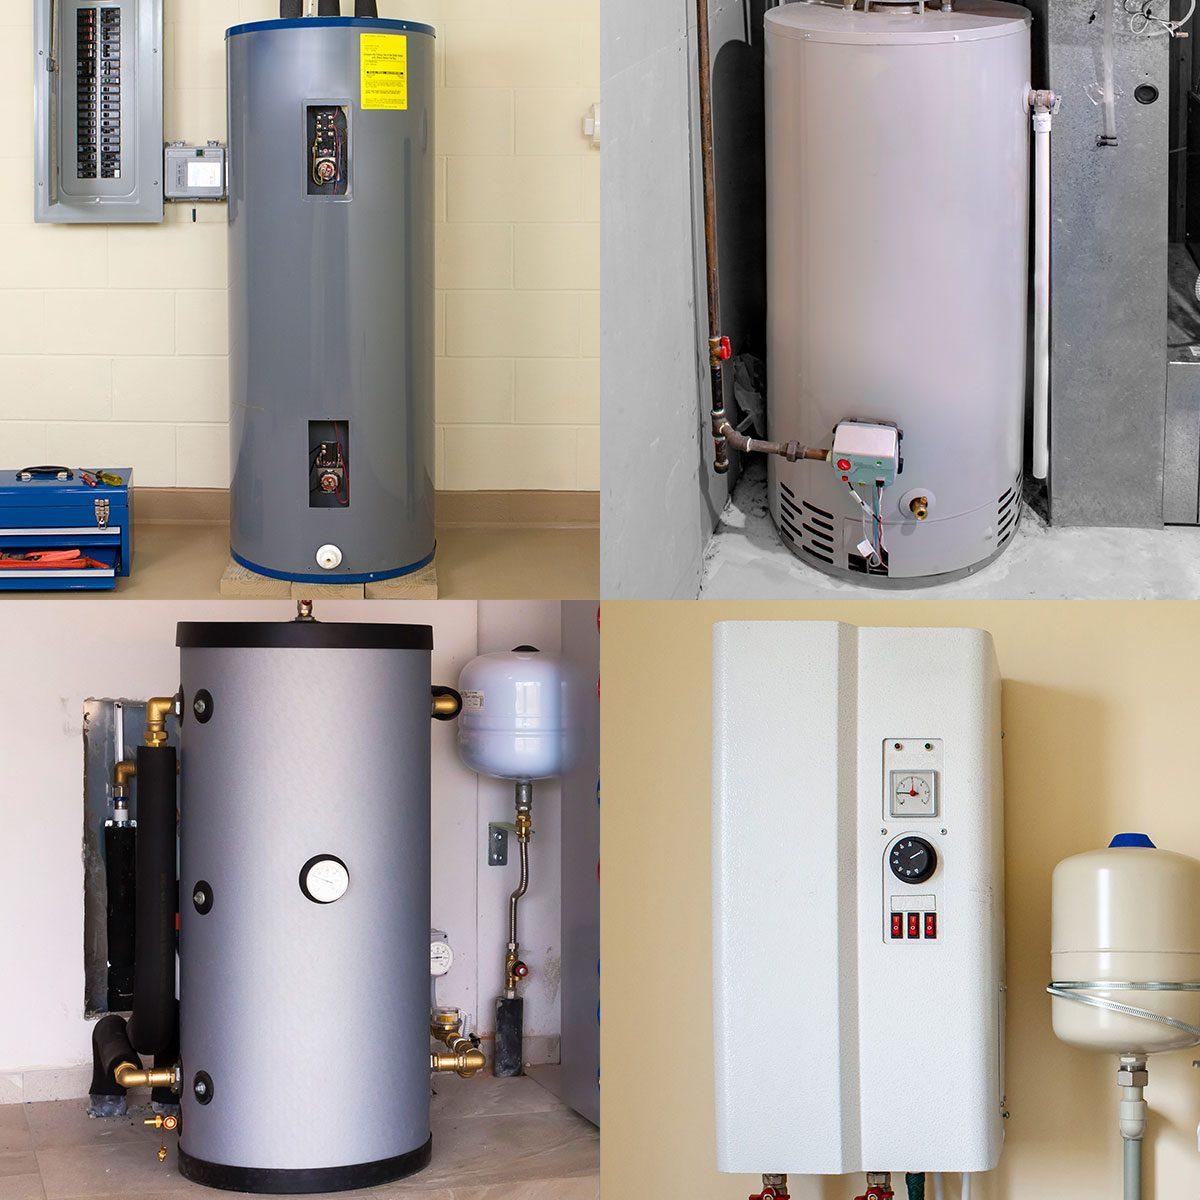 https://www.familyhandyman.com/wp-content/uploads/2022/01/new-homeowners-guide-to-water-heaters-ft-via-getty.com_.jpg